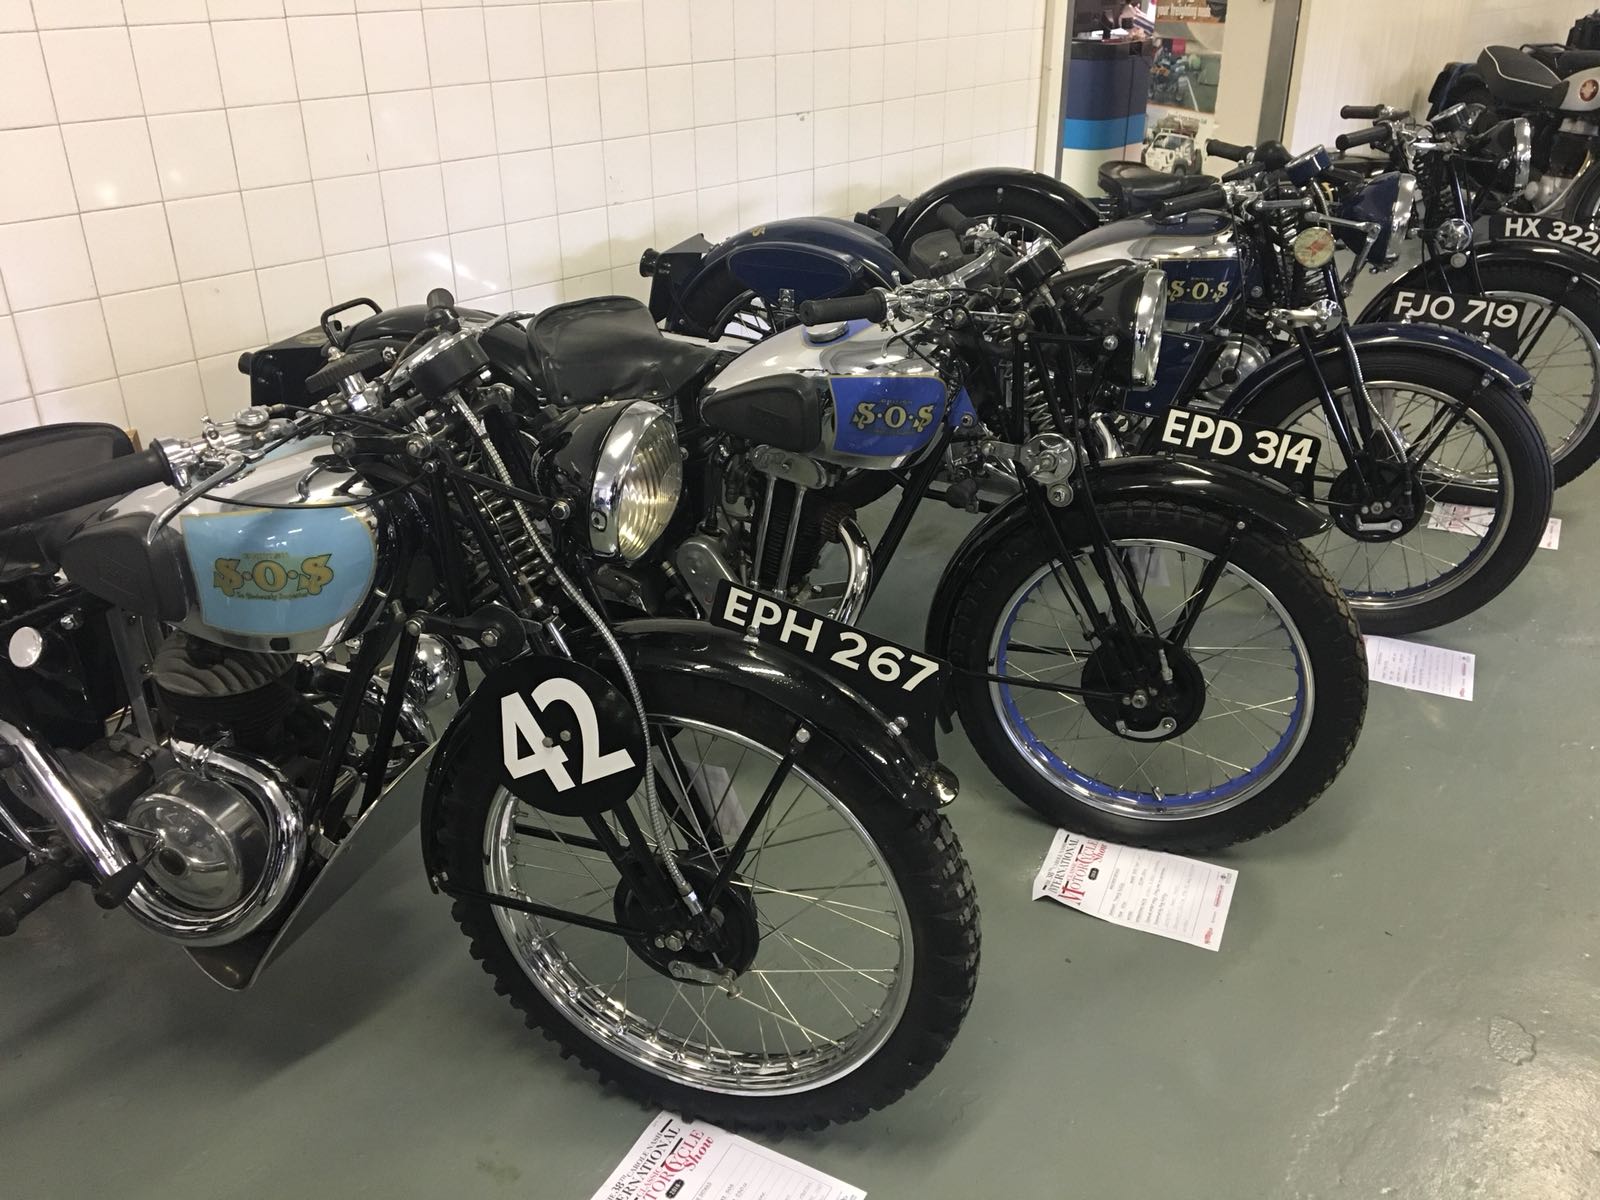 More bikes from the SOS collection in the VMCC hall